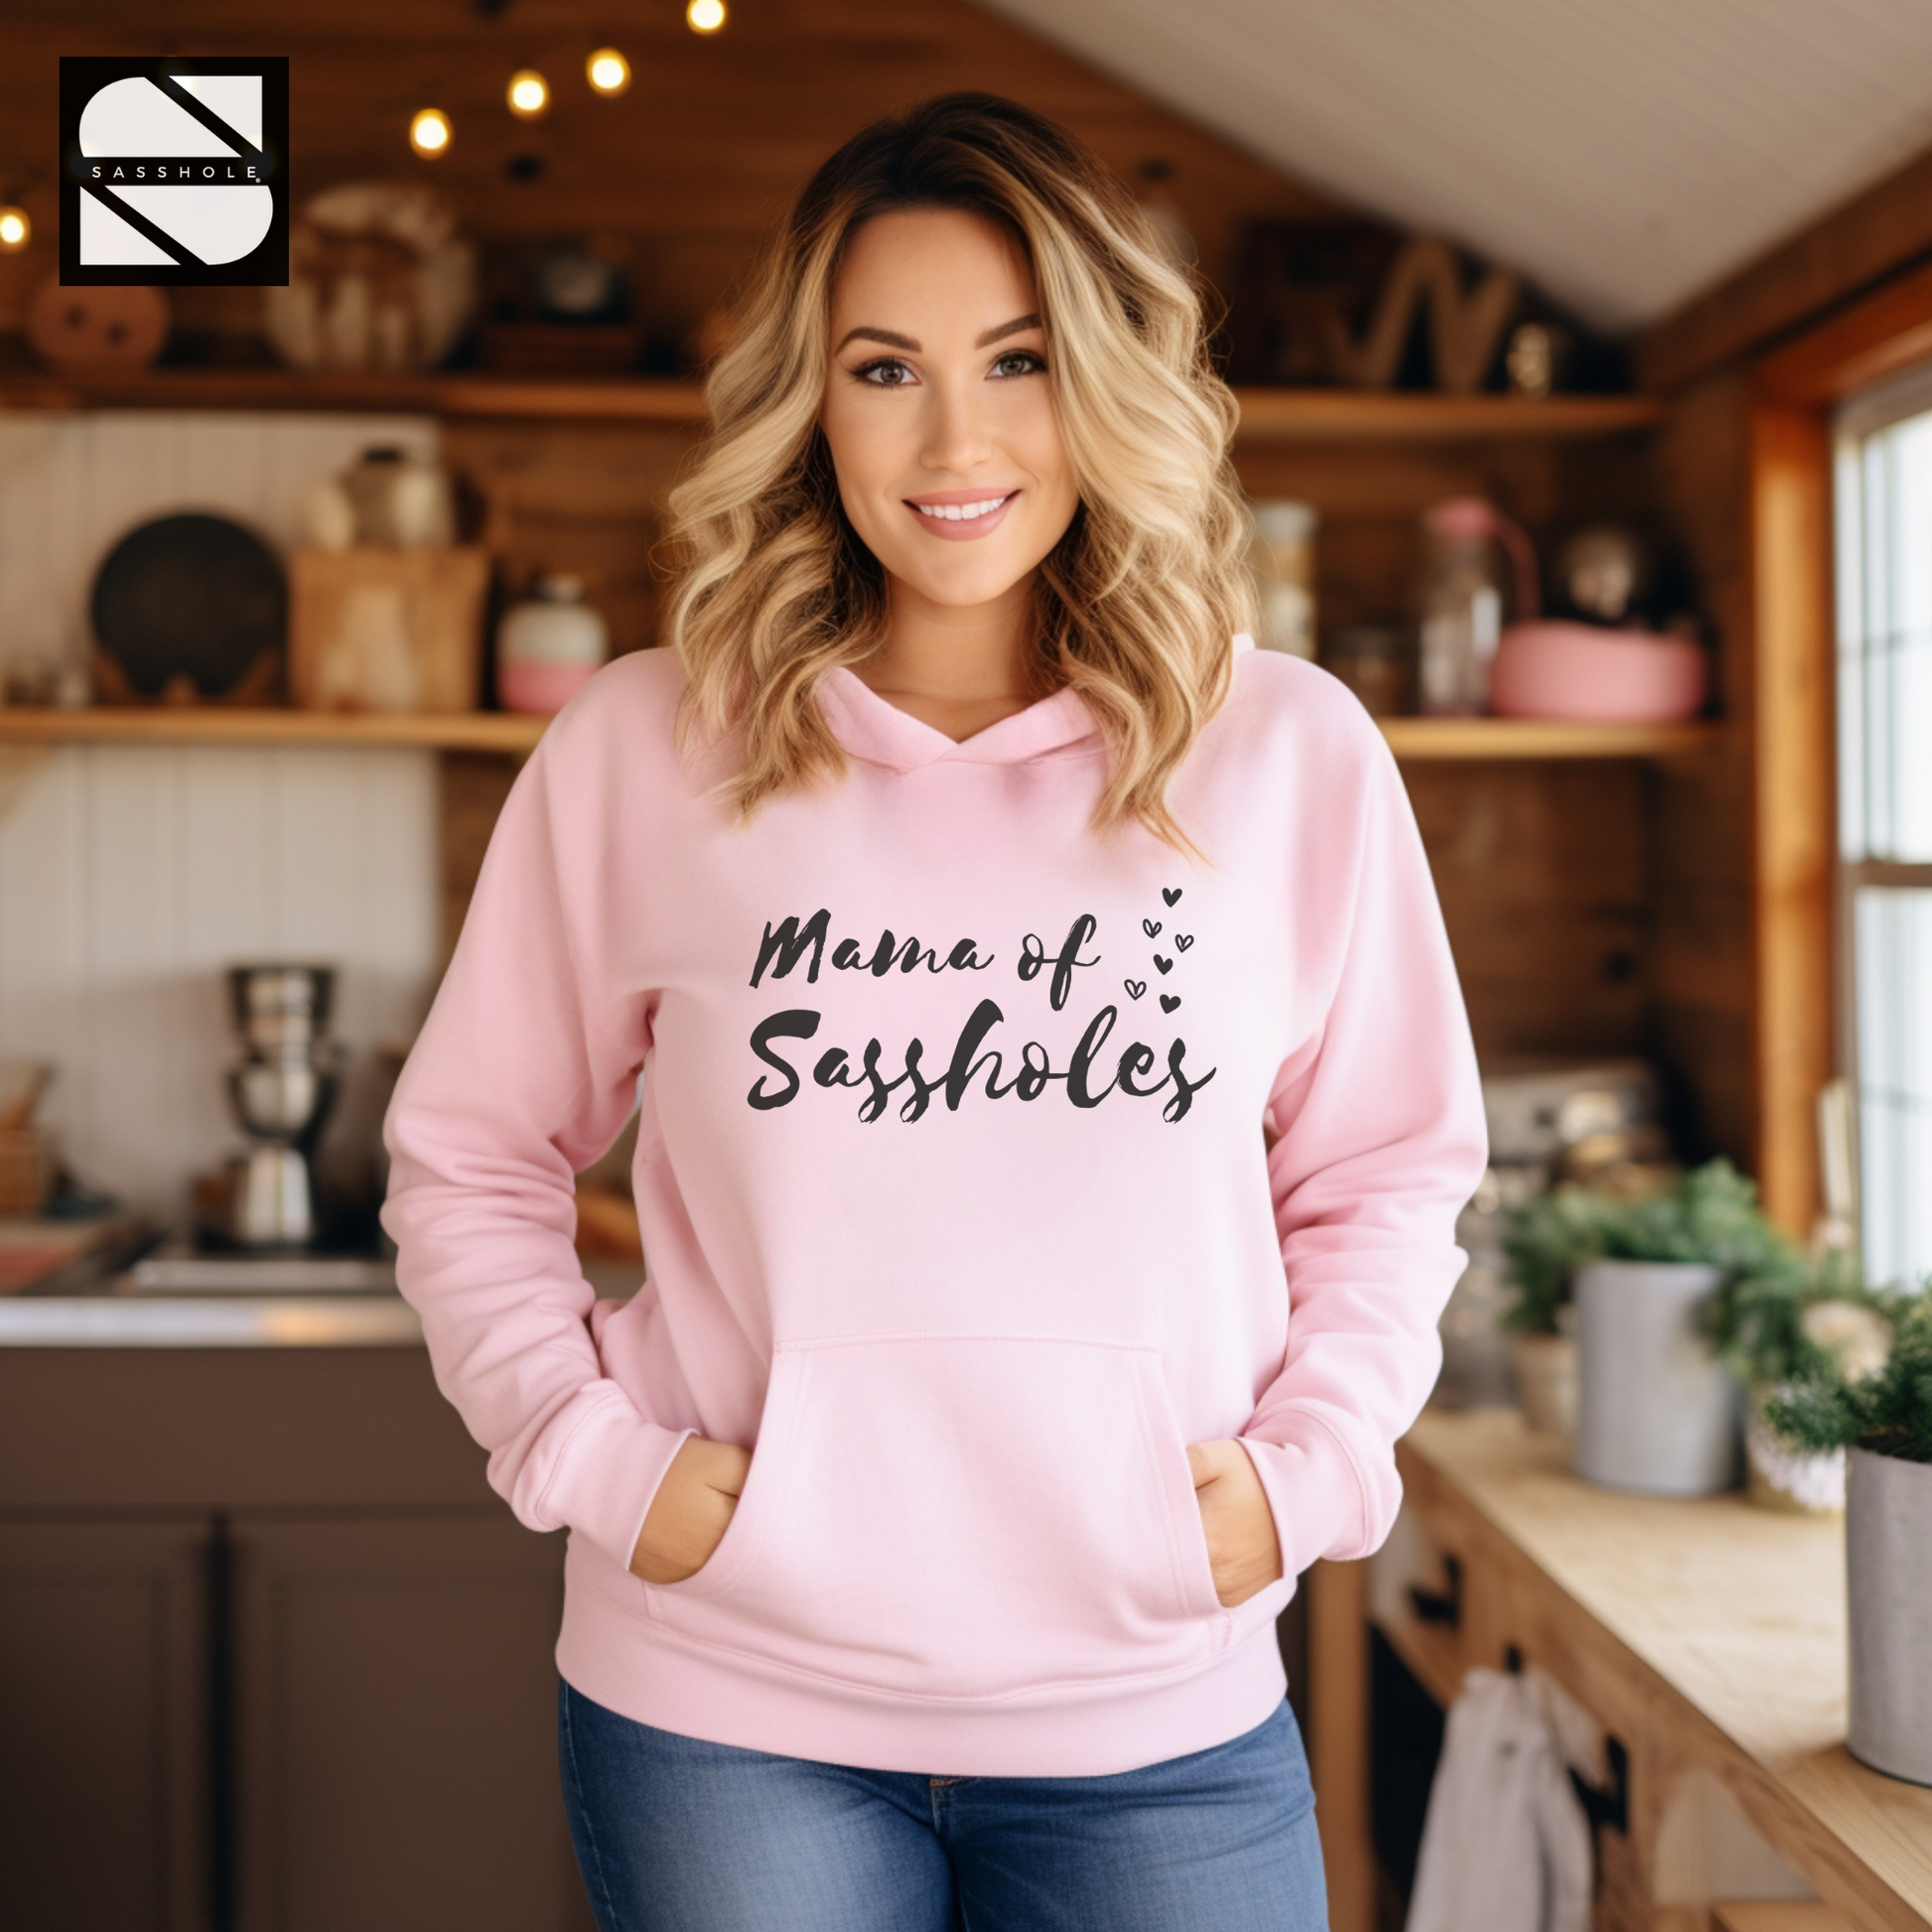 womens pullover hoodie, womens oversized pullover hoodie, womens hoodies, womens hoodie, womens graphic pullover hoodies womens fleece pullover hoodies, women's sweatshirts & hoodies, women's sweatshirt & hoodies, women's pullover hoodies, women's pullover, Women's Clothing, women's casual wear, women hoodies, women hoodie, witty wardrobe, witty slogan hoodie, witty hoodie design, witty anniversary gift, whimsical hoodie design, Unisex